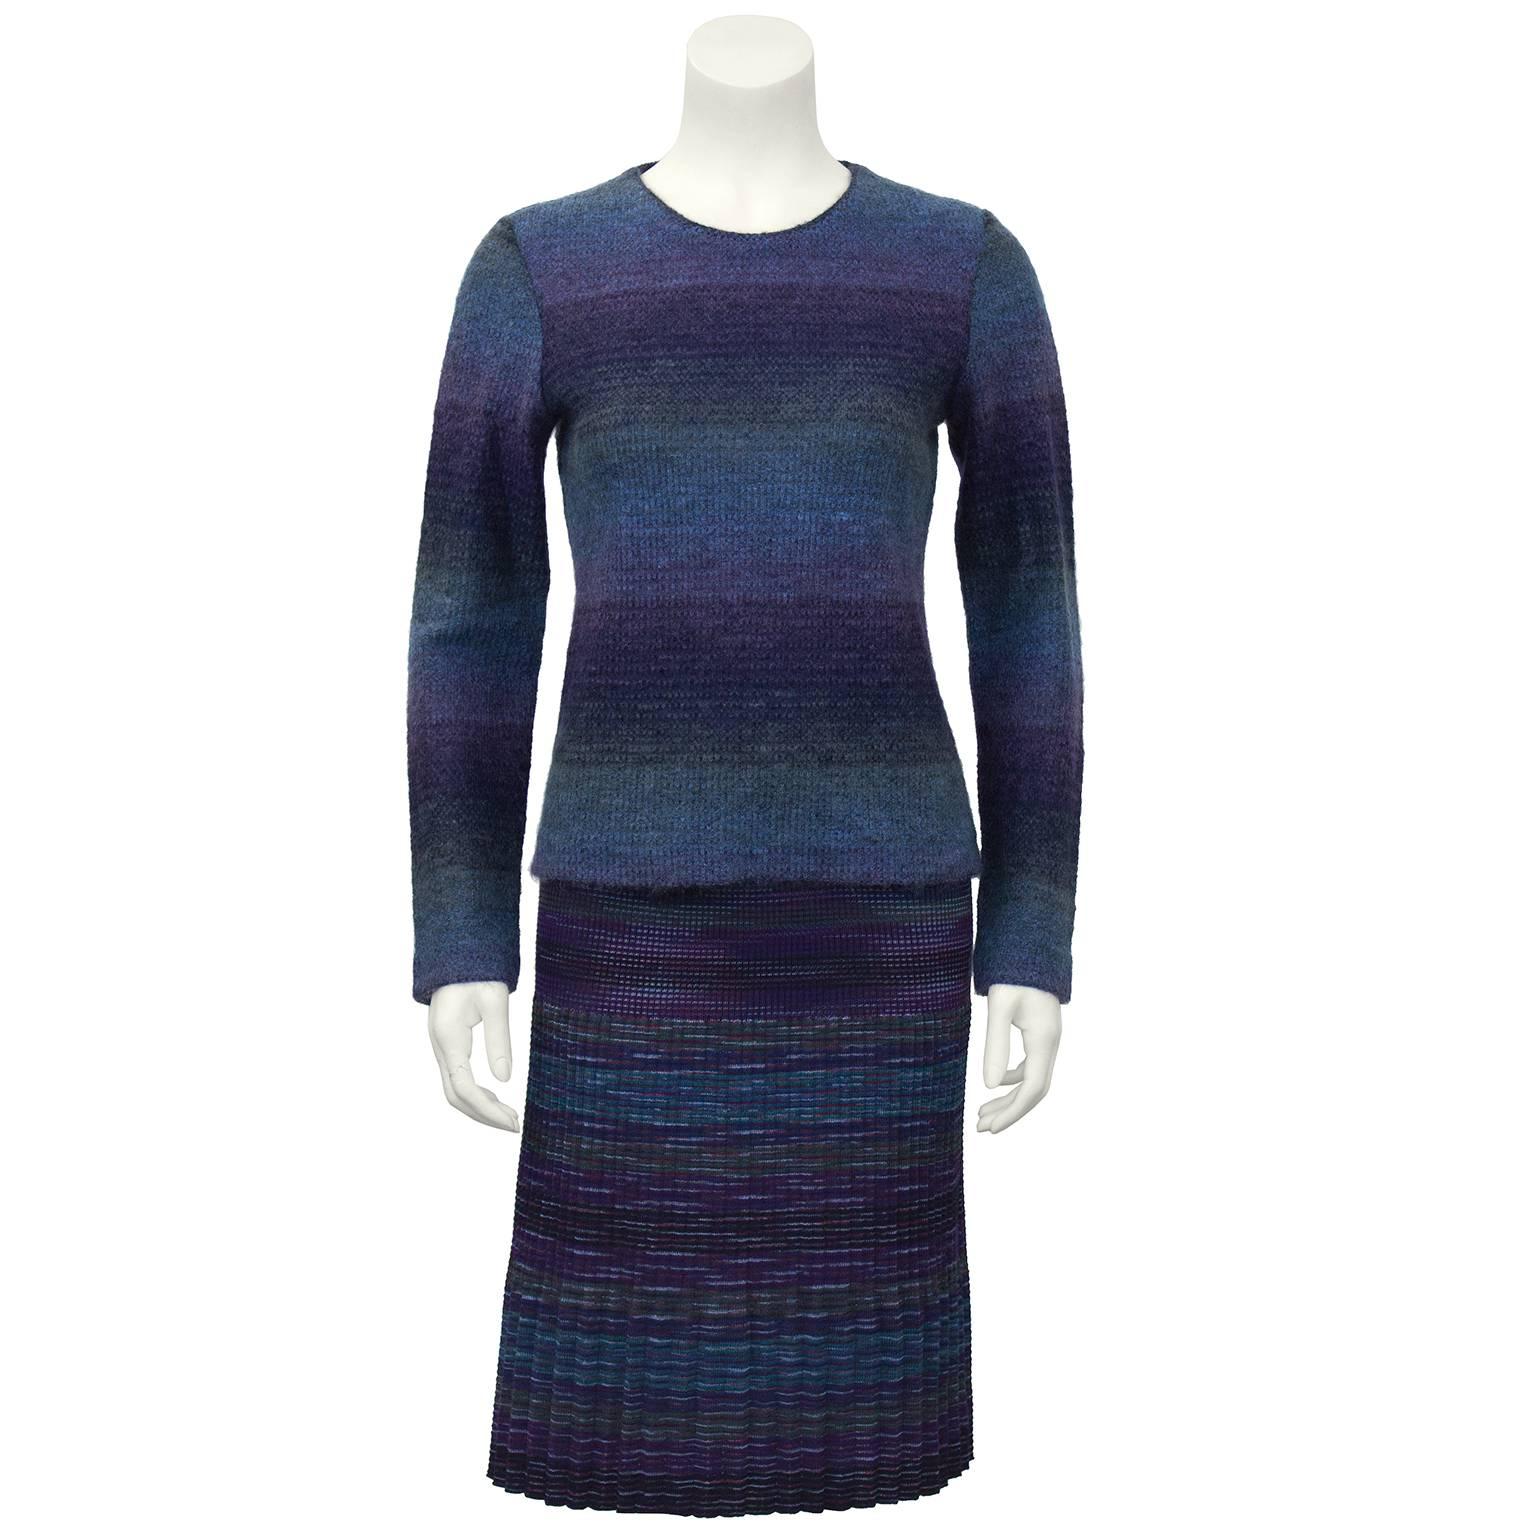 1990's 3 piece Missoni skirt suit. The herring bone knit skirt with matching color top can be worn with our without the stunning knit herringbone blazer. All pieces are great as separates and as an ensemble. Navy, lavender, purple, black and teal